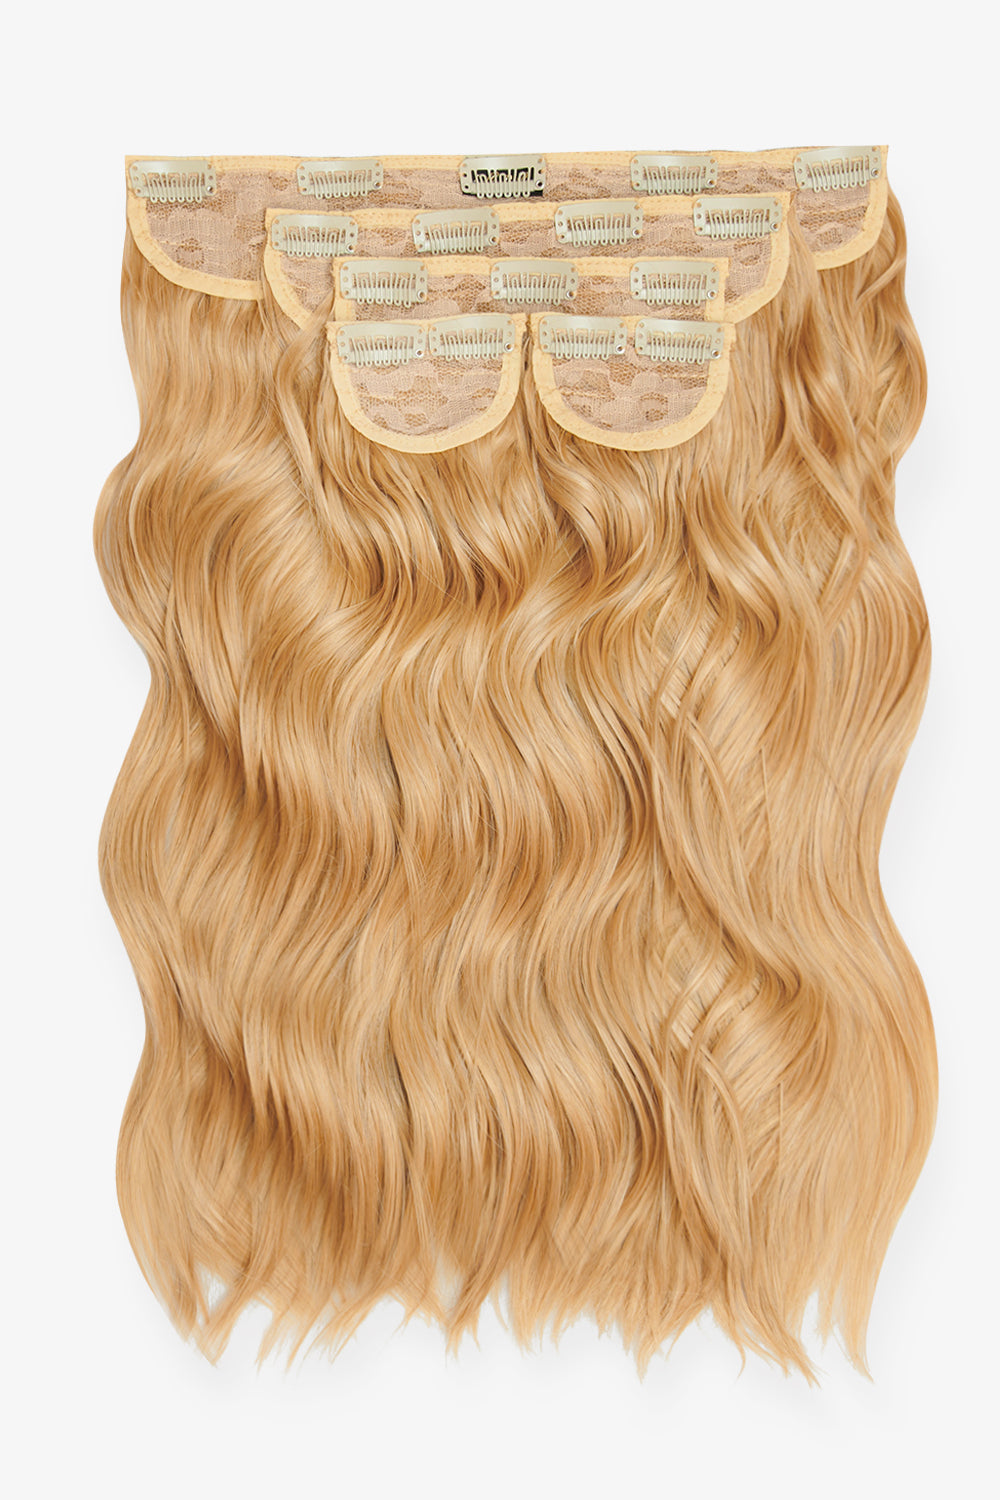 Super Thick 16’’ 5 Piece Brushed Out Wave Clip In Hair Extensions + Hair Care Bundle - Caramel Blonde